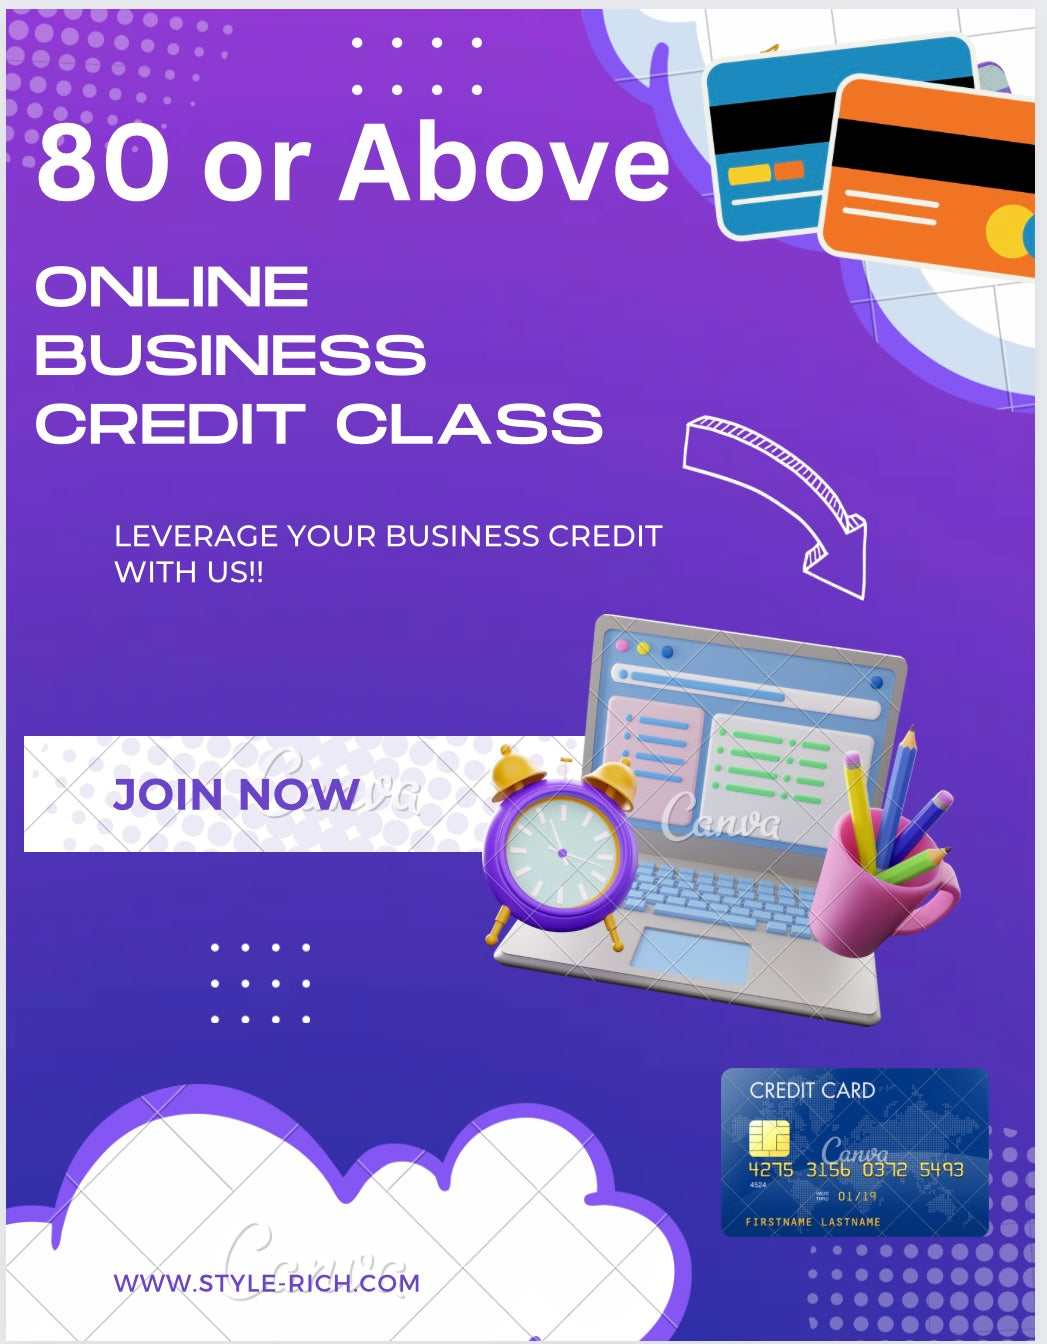 Build your business credit profile